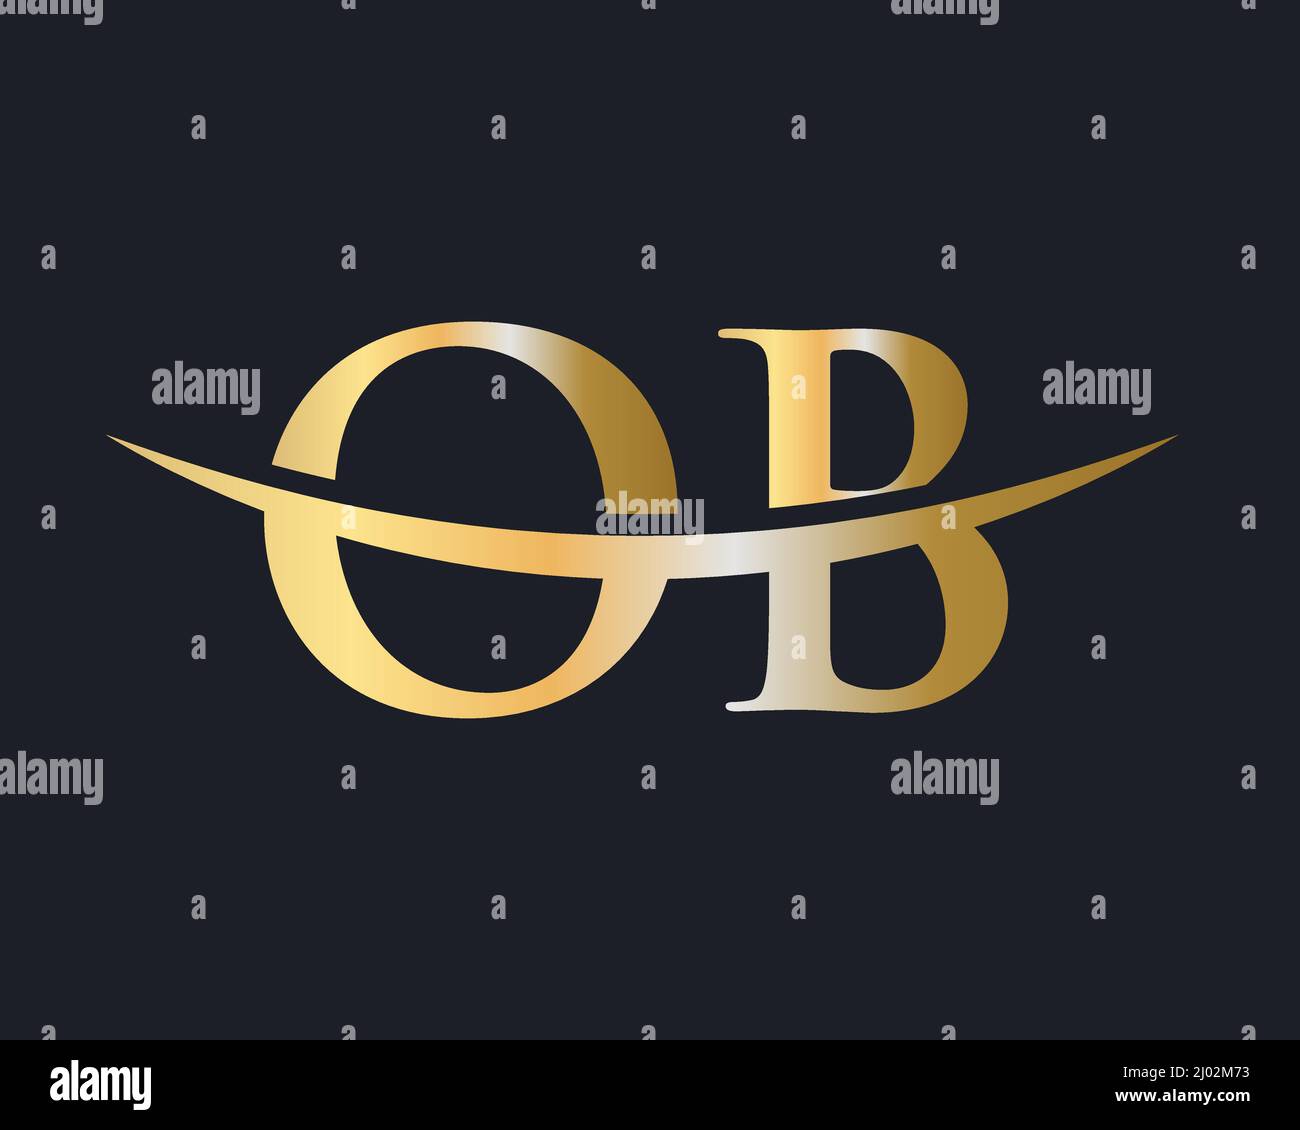 Gold Silver Letter Ob Vector & Photo (Free Trial)